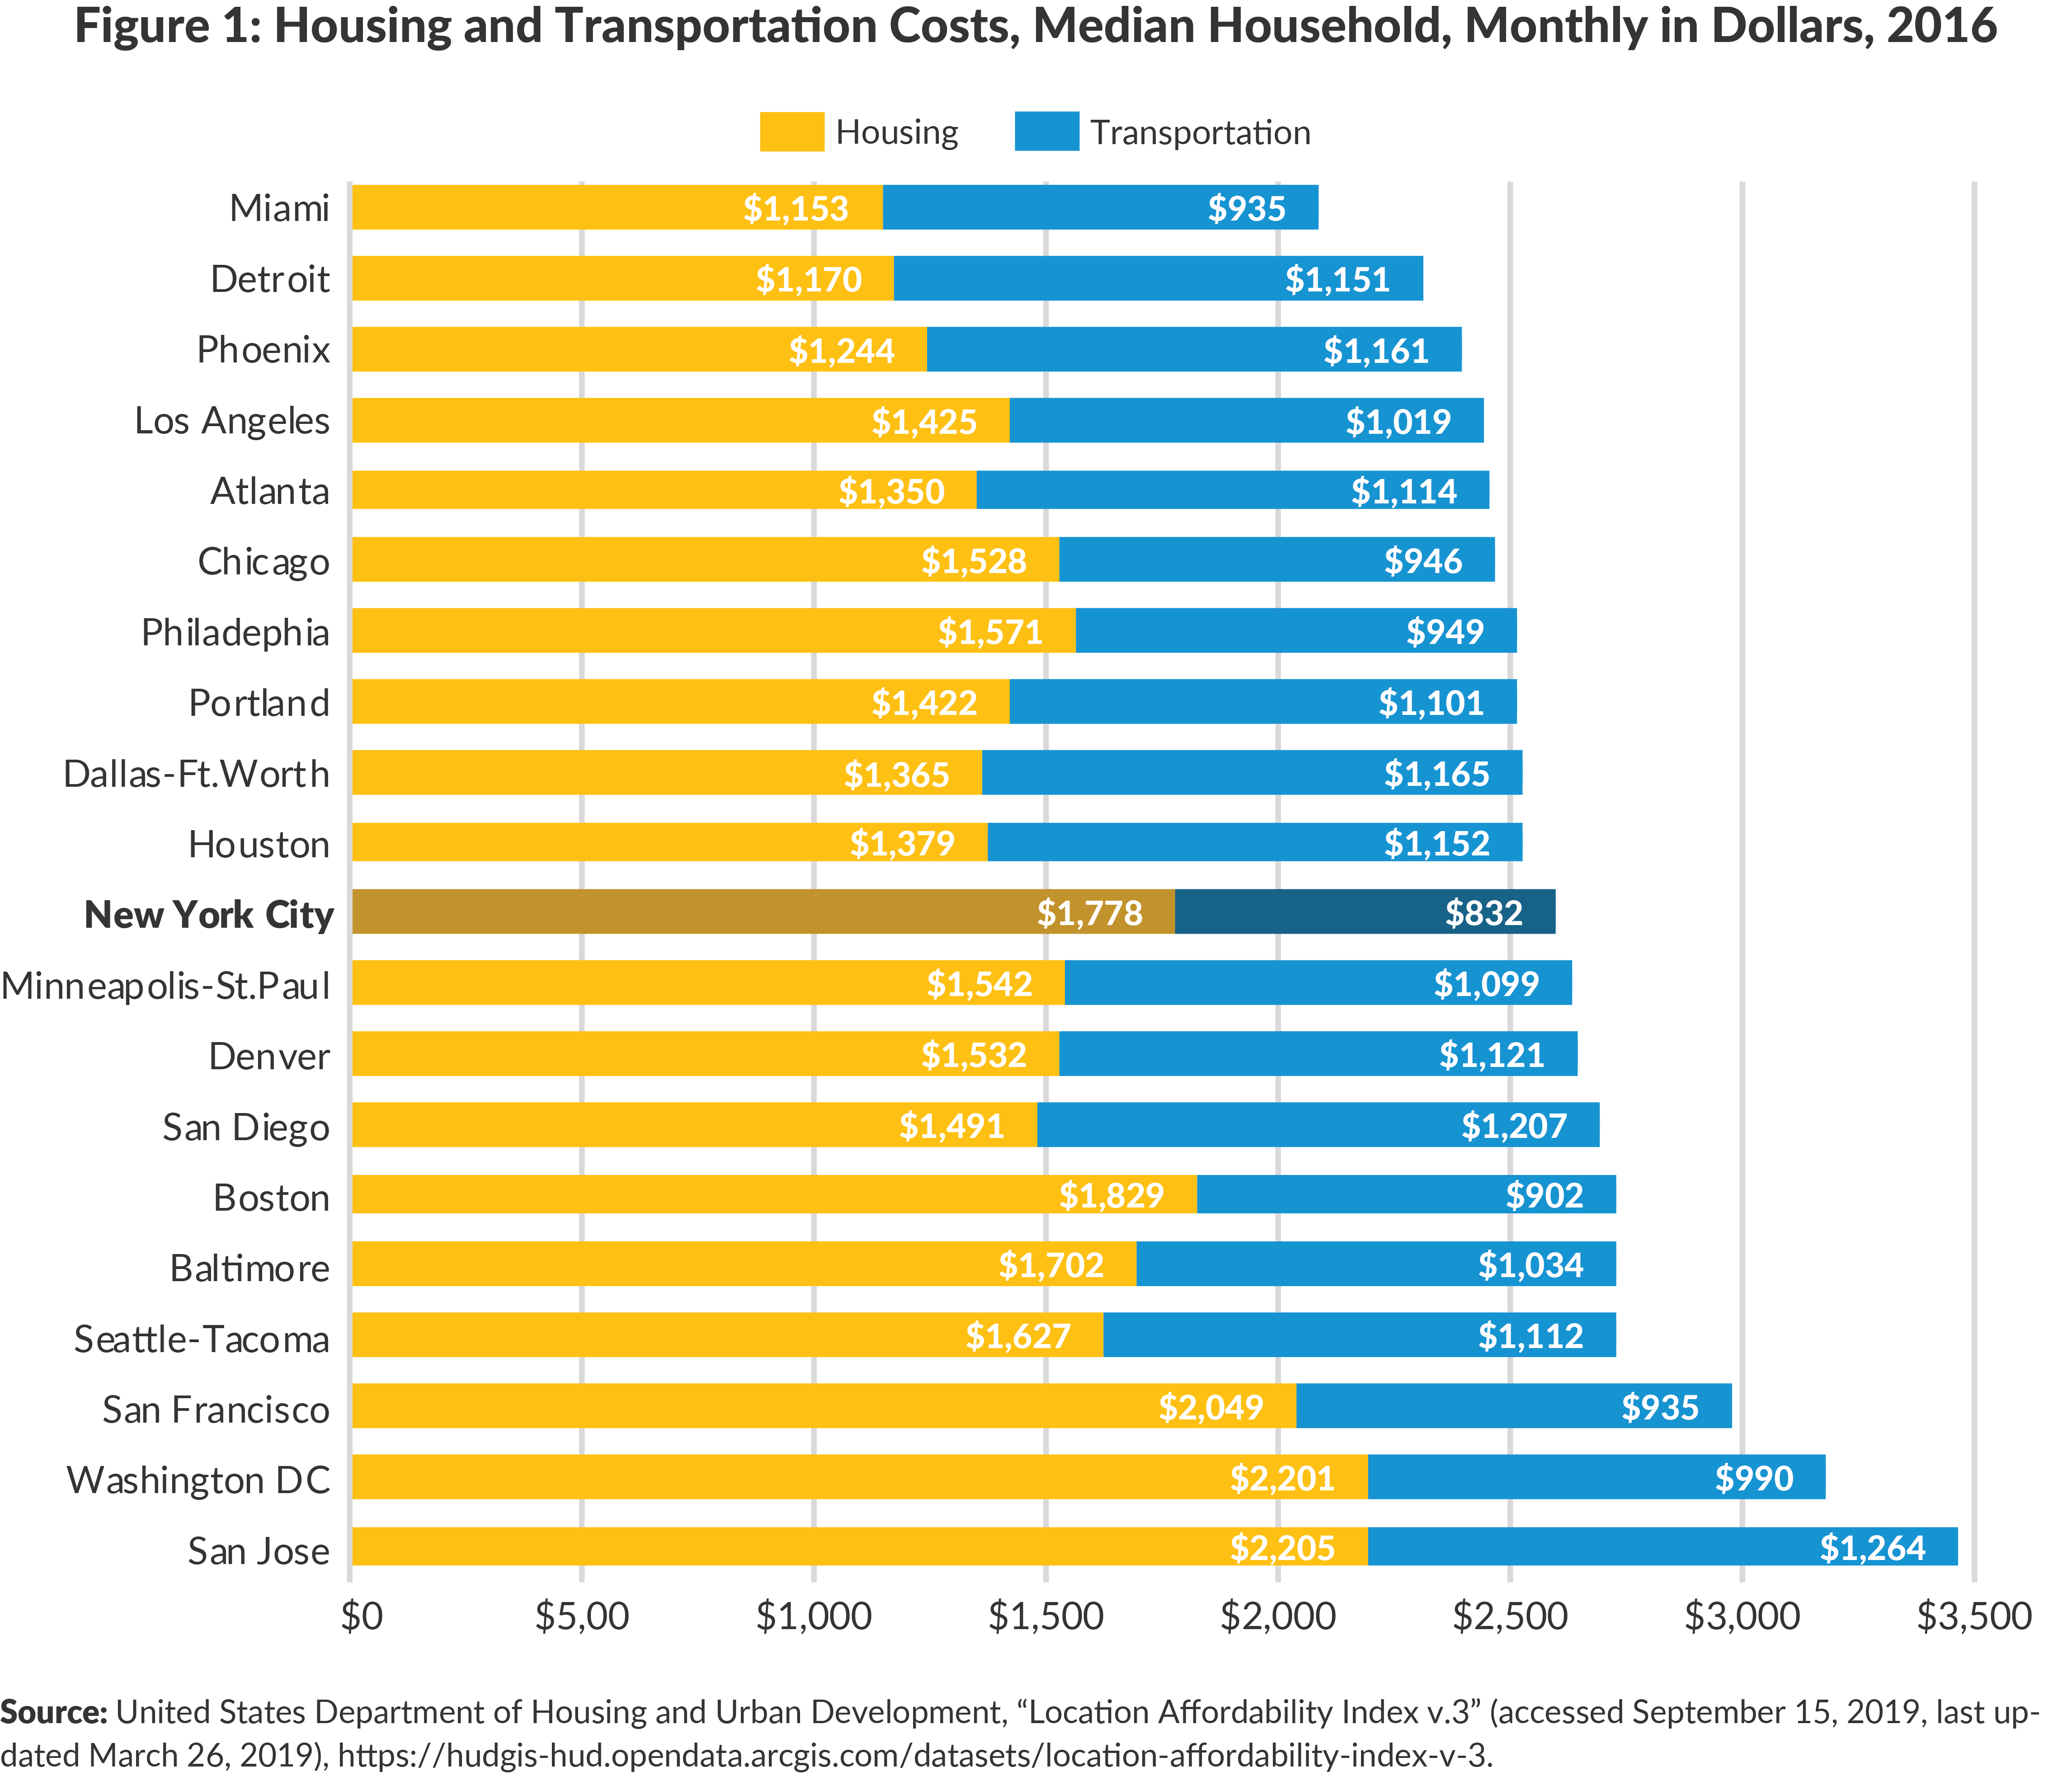 Figure 1. Median Housing and Transportation Costs, Monthly in Dollars, 2016